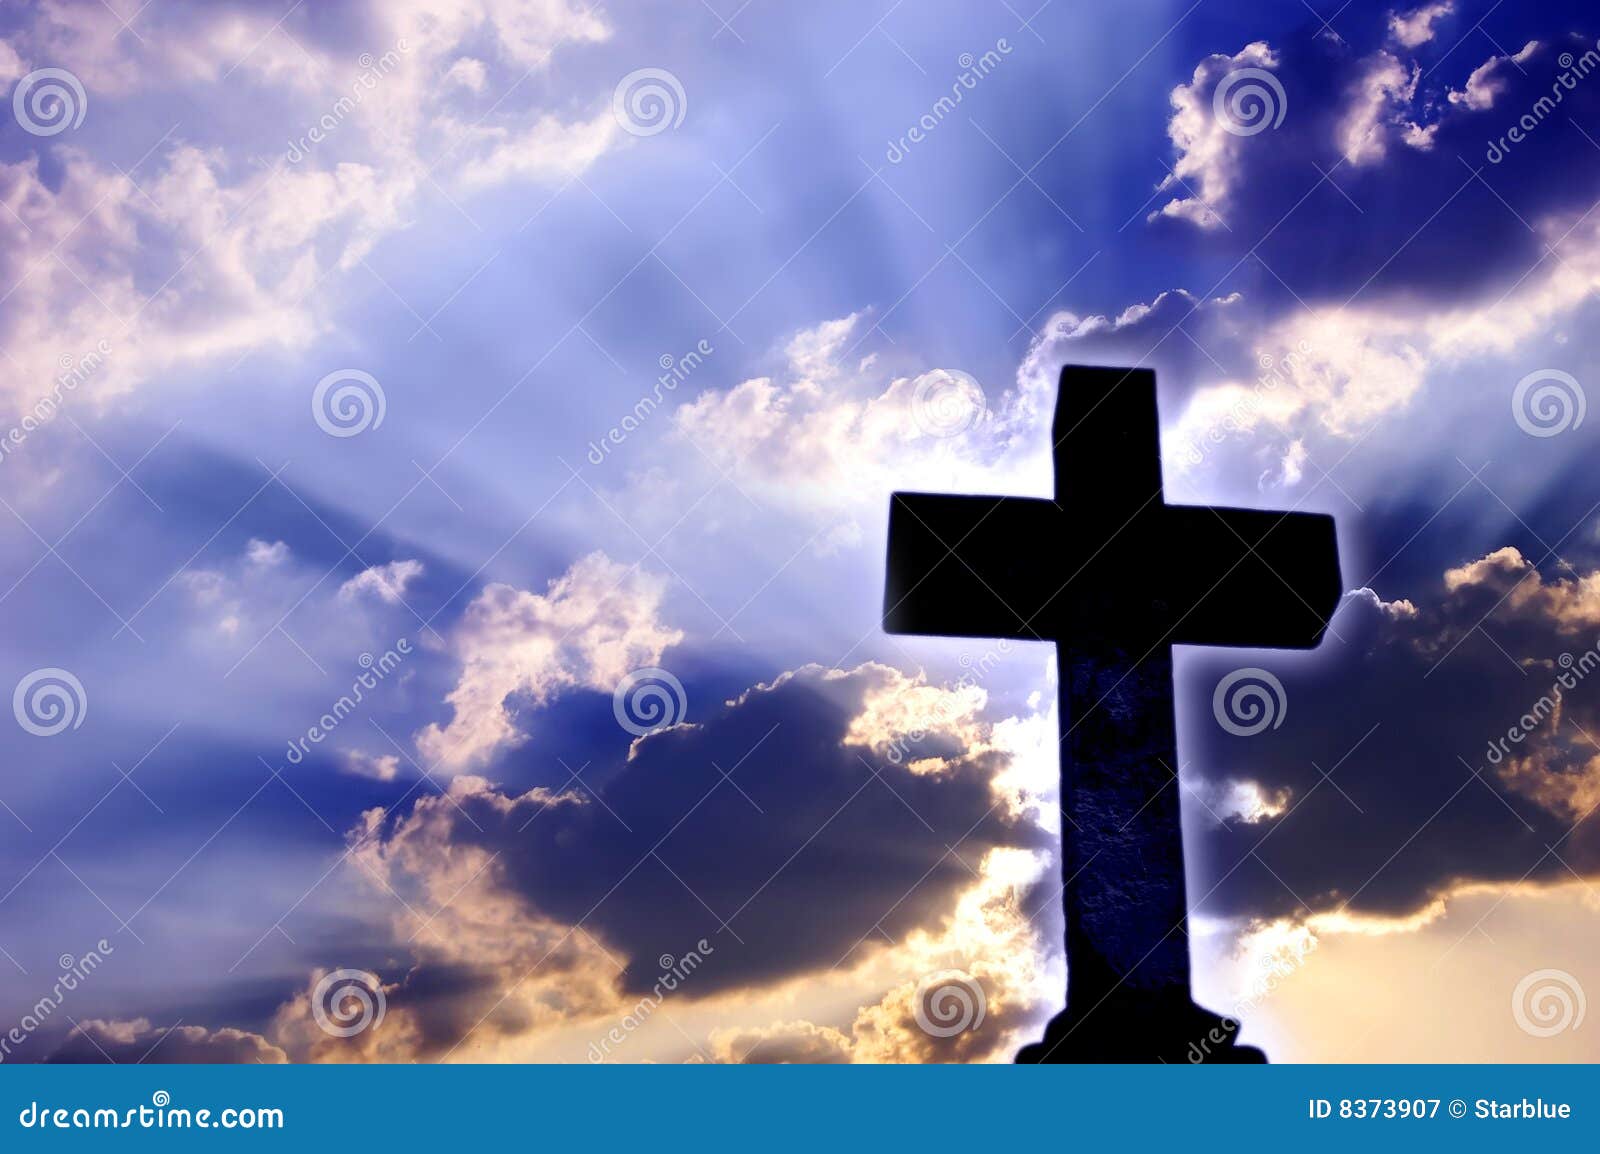 Religious Cross Royalty Free Stock Photography - Image: 8373907